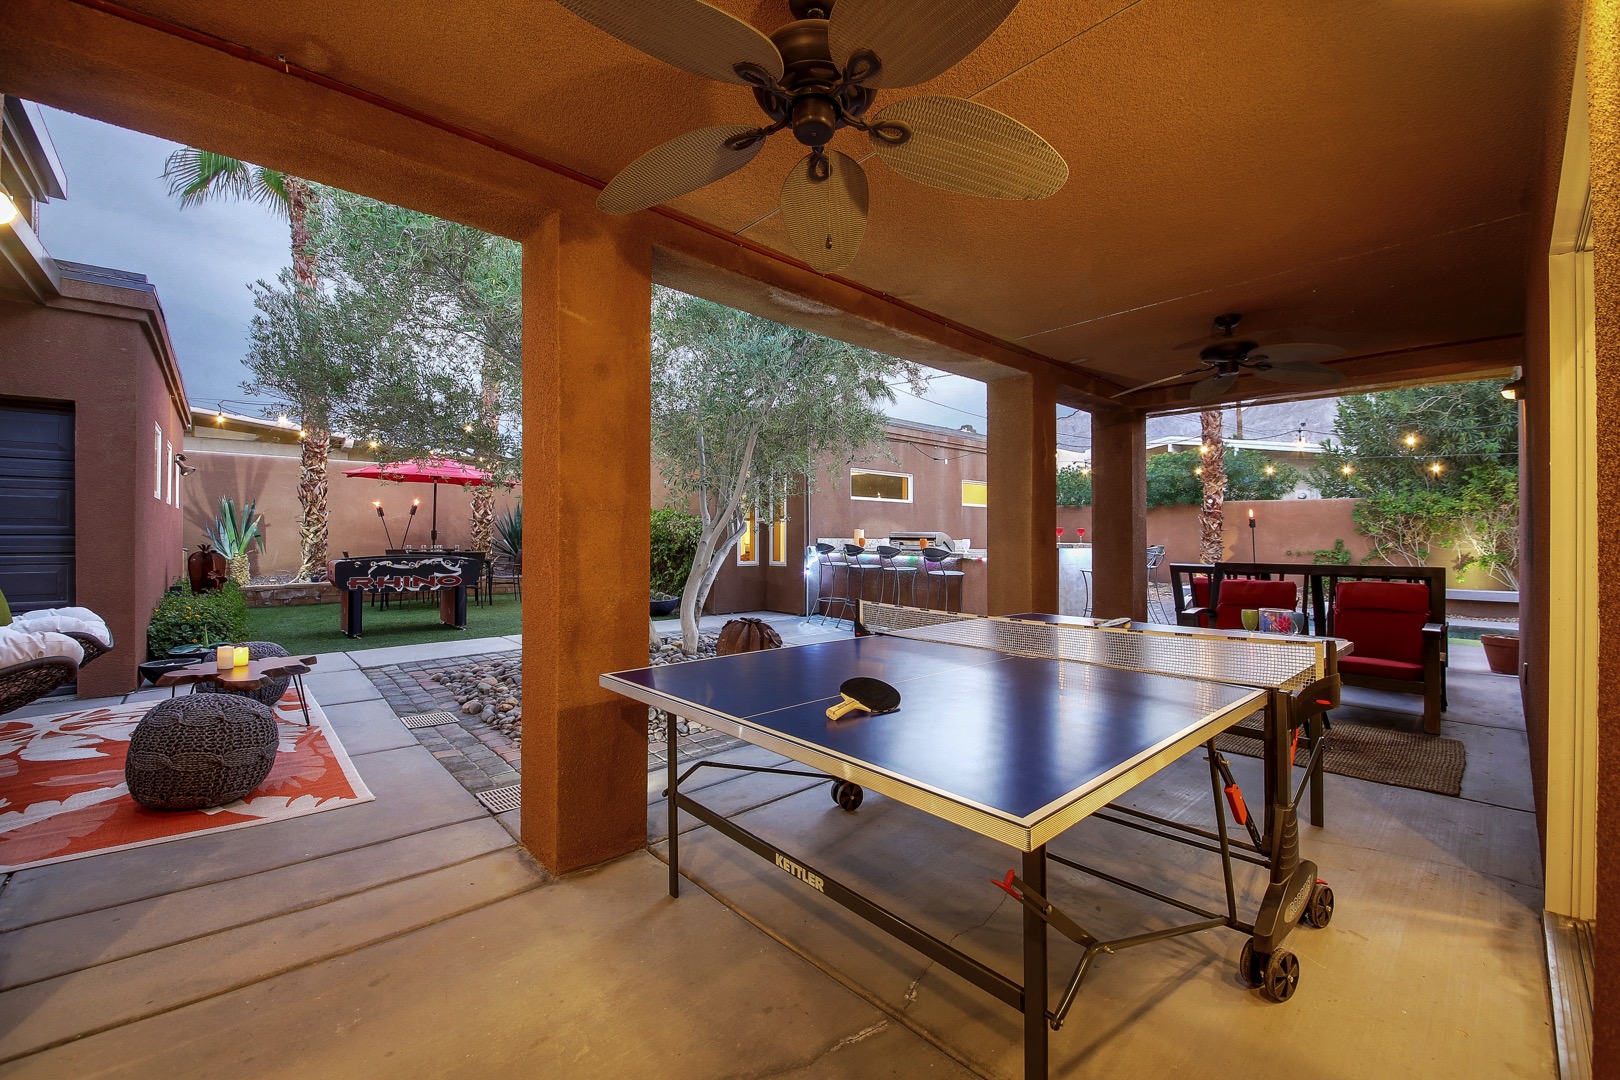 Challenge a friend to a ping pong tournament, stay cool under the outdoor fan.